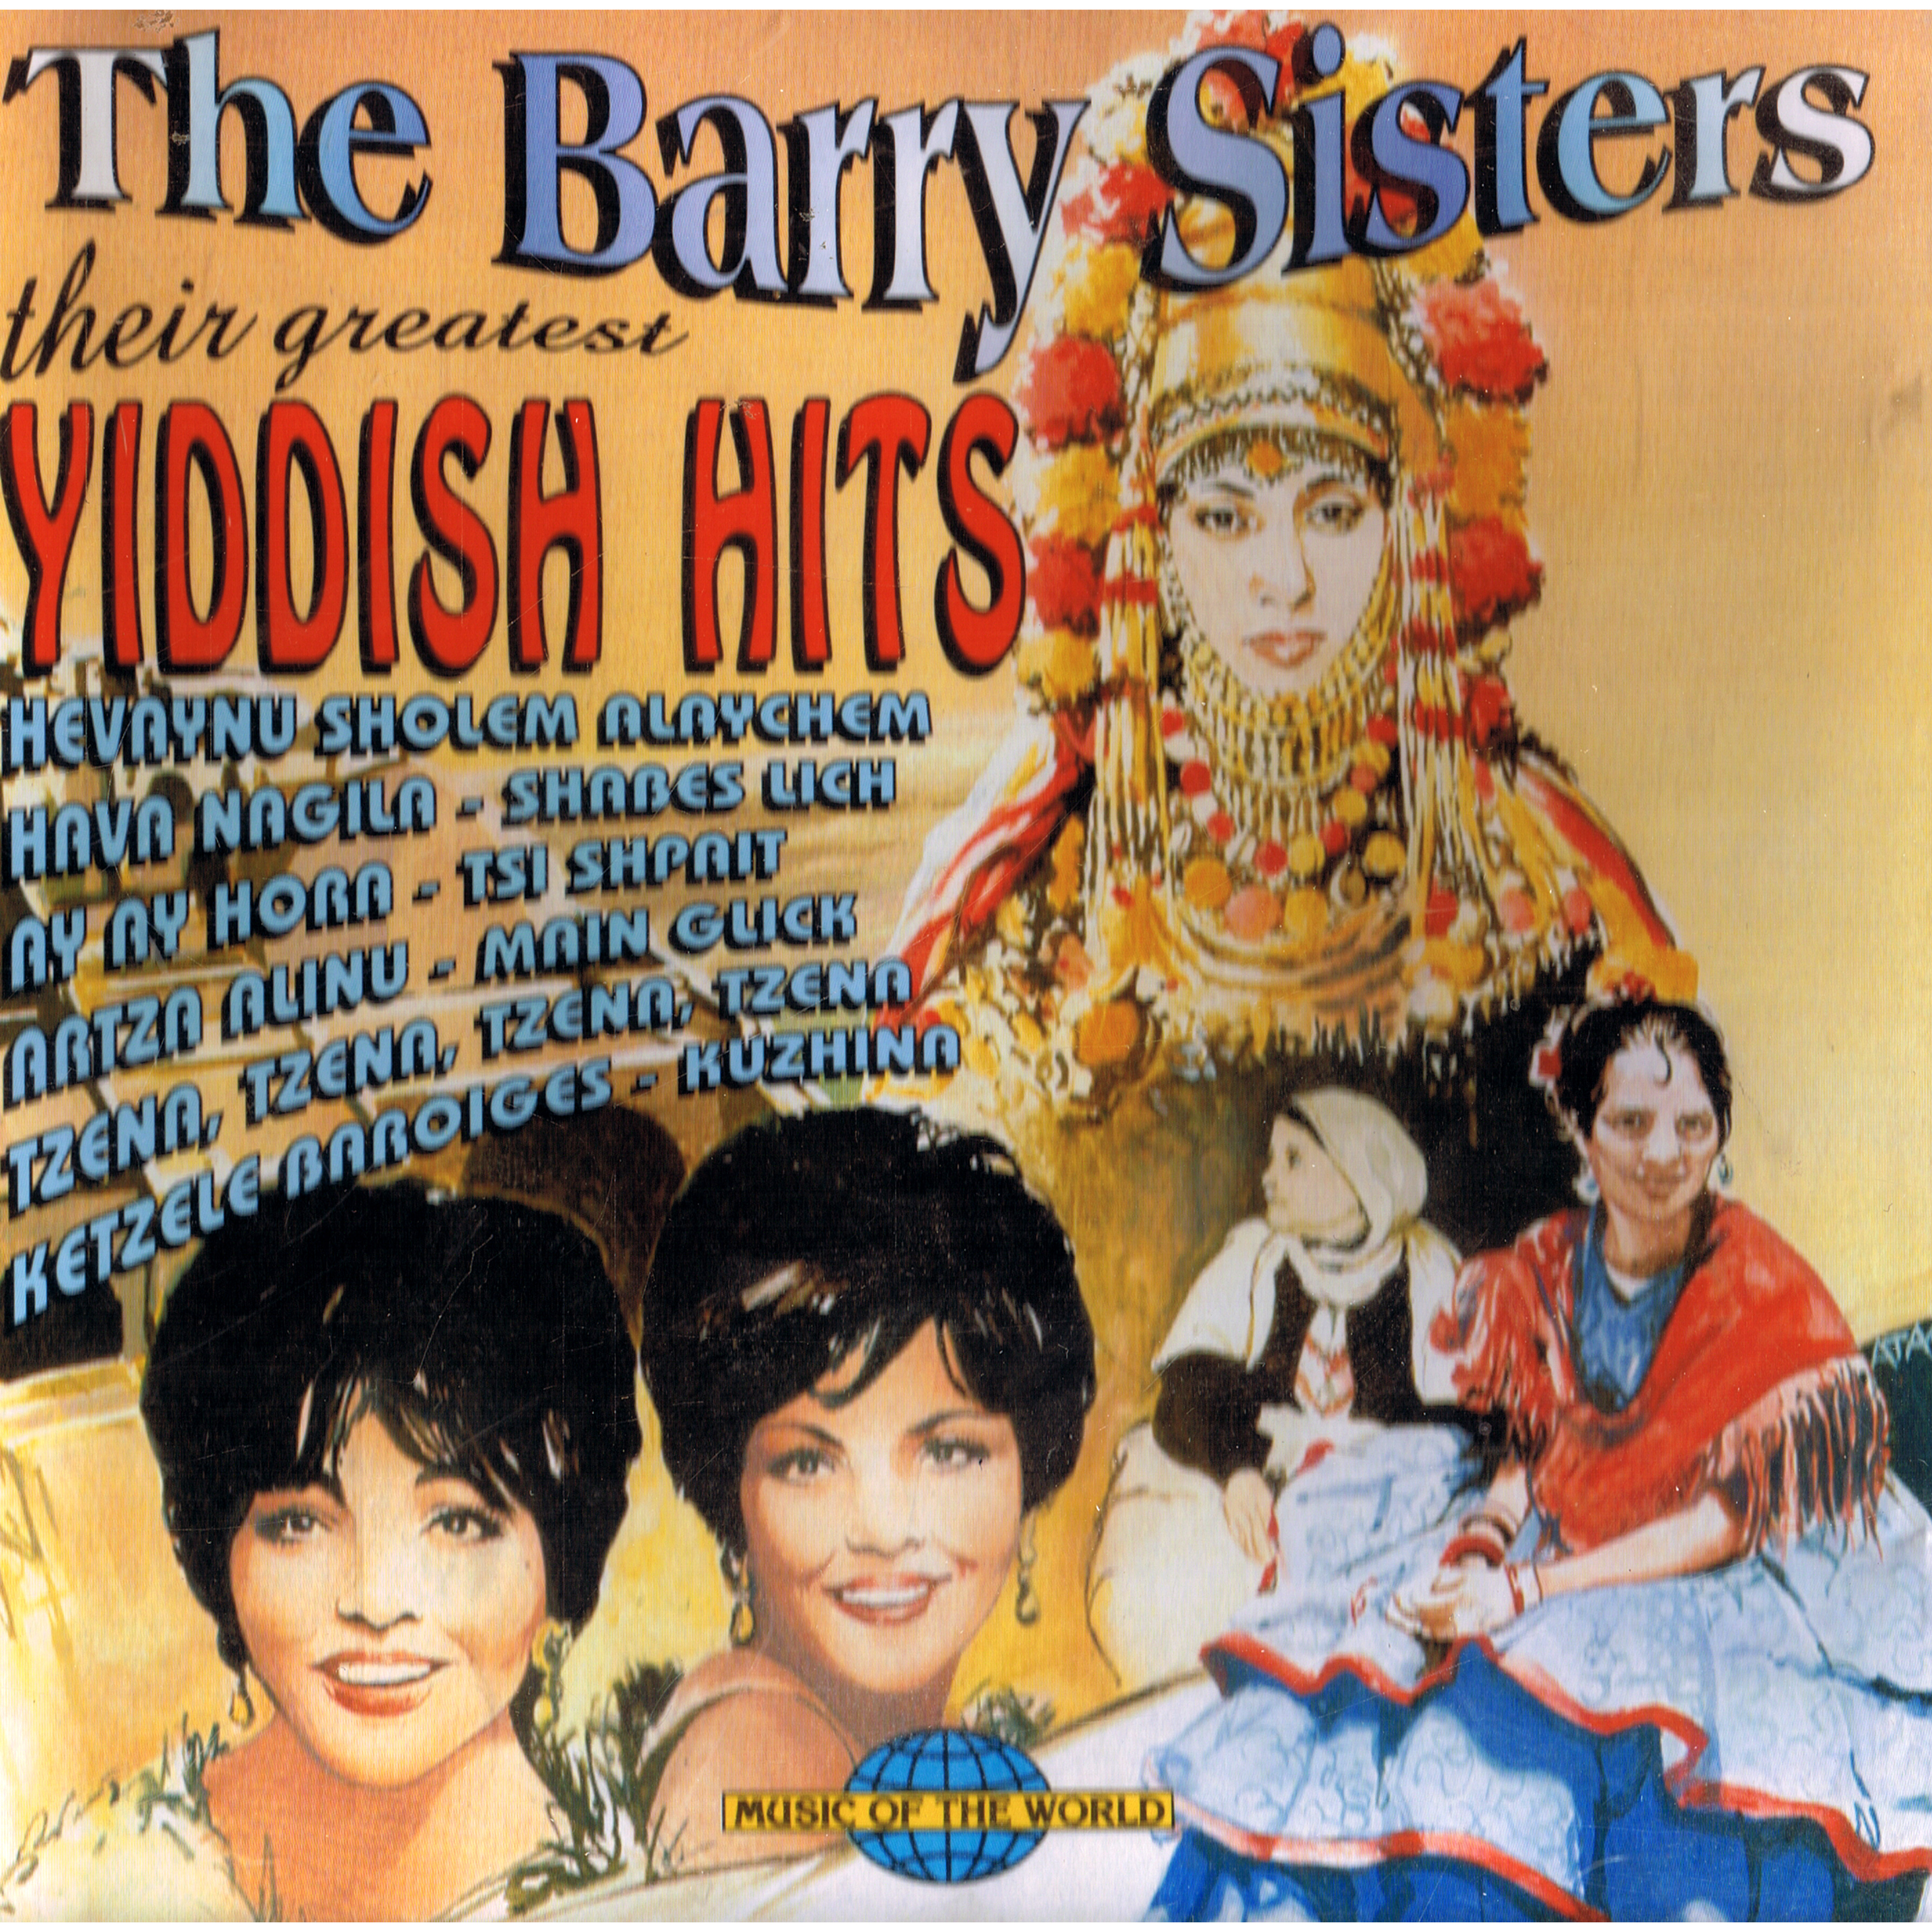 The Barry Sisters Their Greatest Yiddish Hits